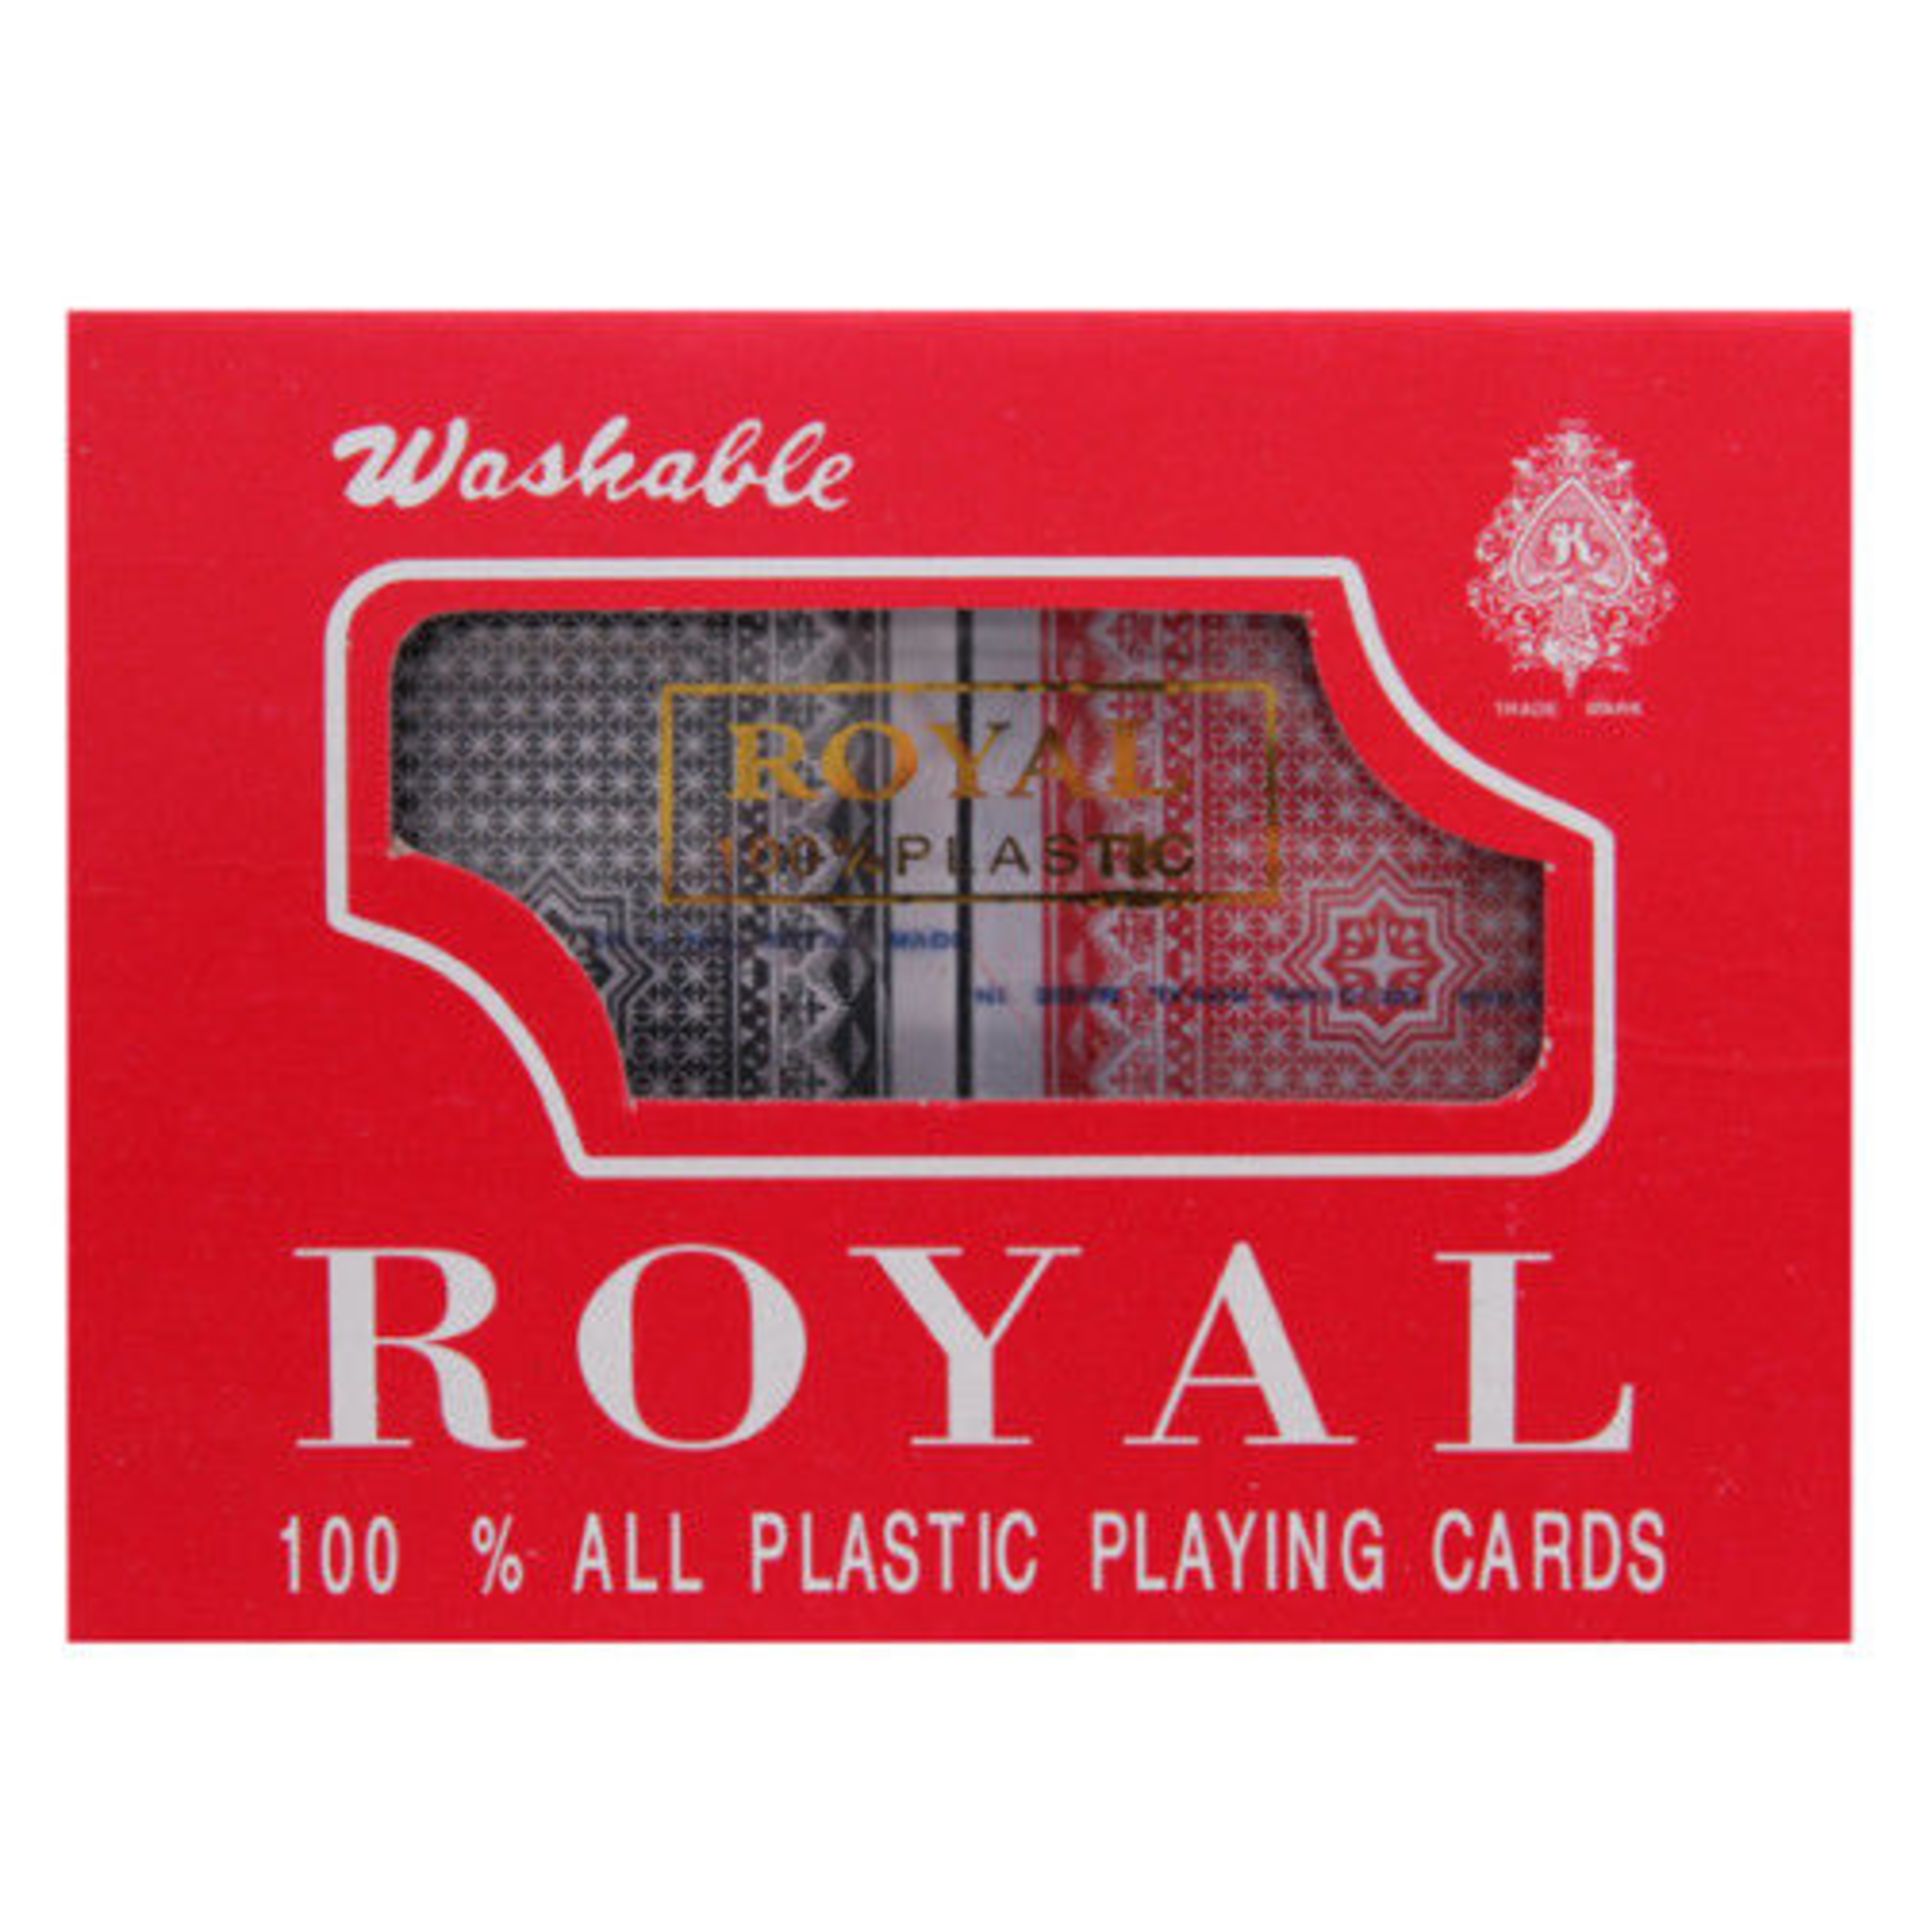 74 x Boxes of Plastic Playing Cards - Each box contains 2 packs. - Image 2 of 2